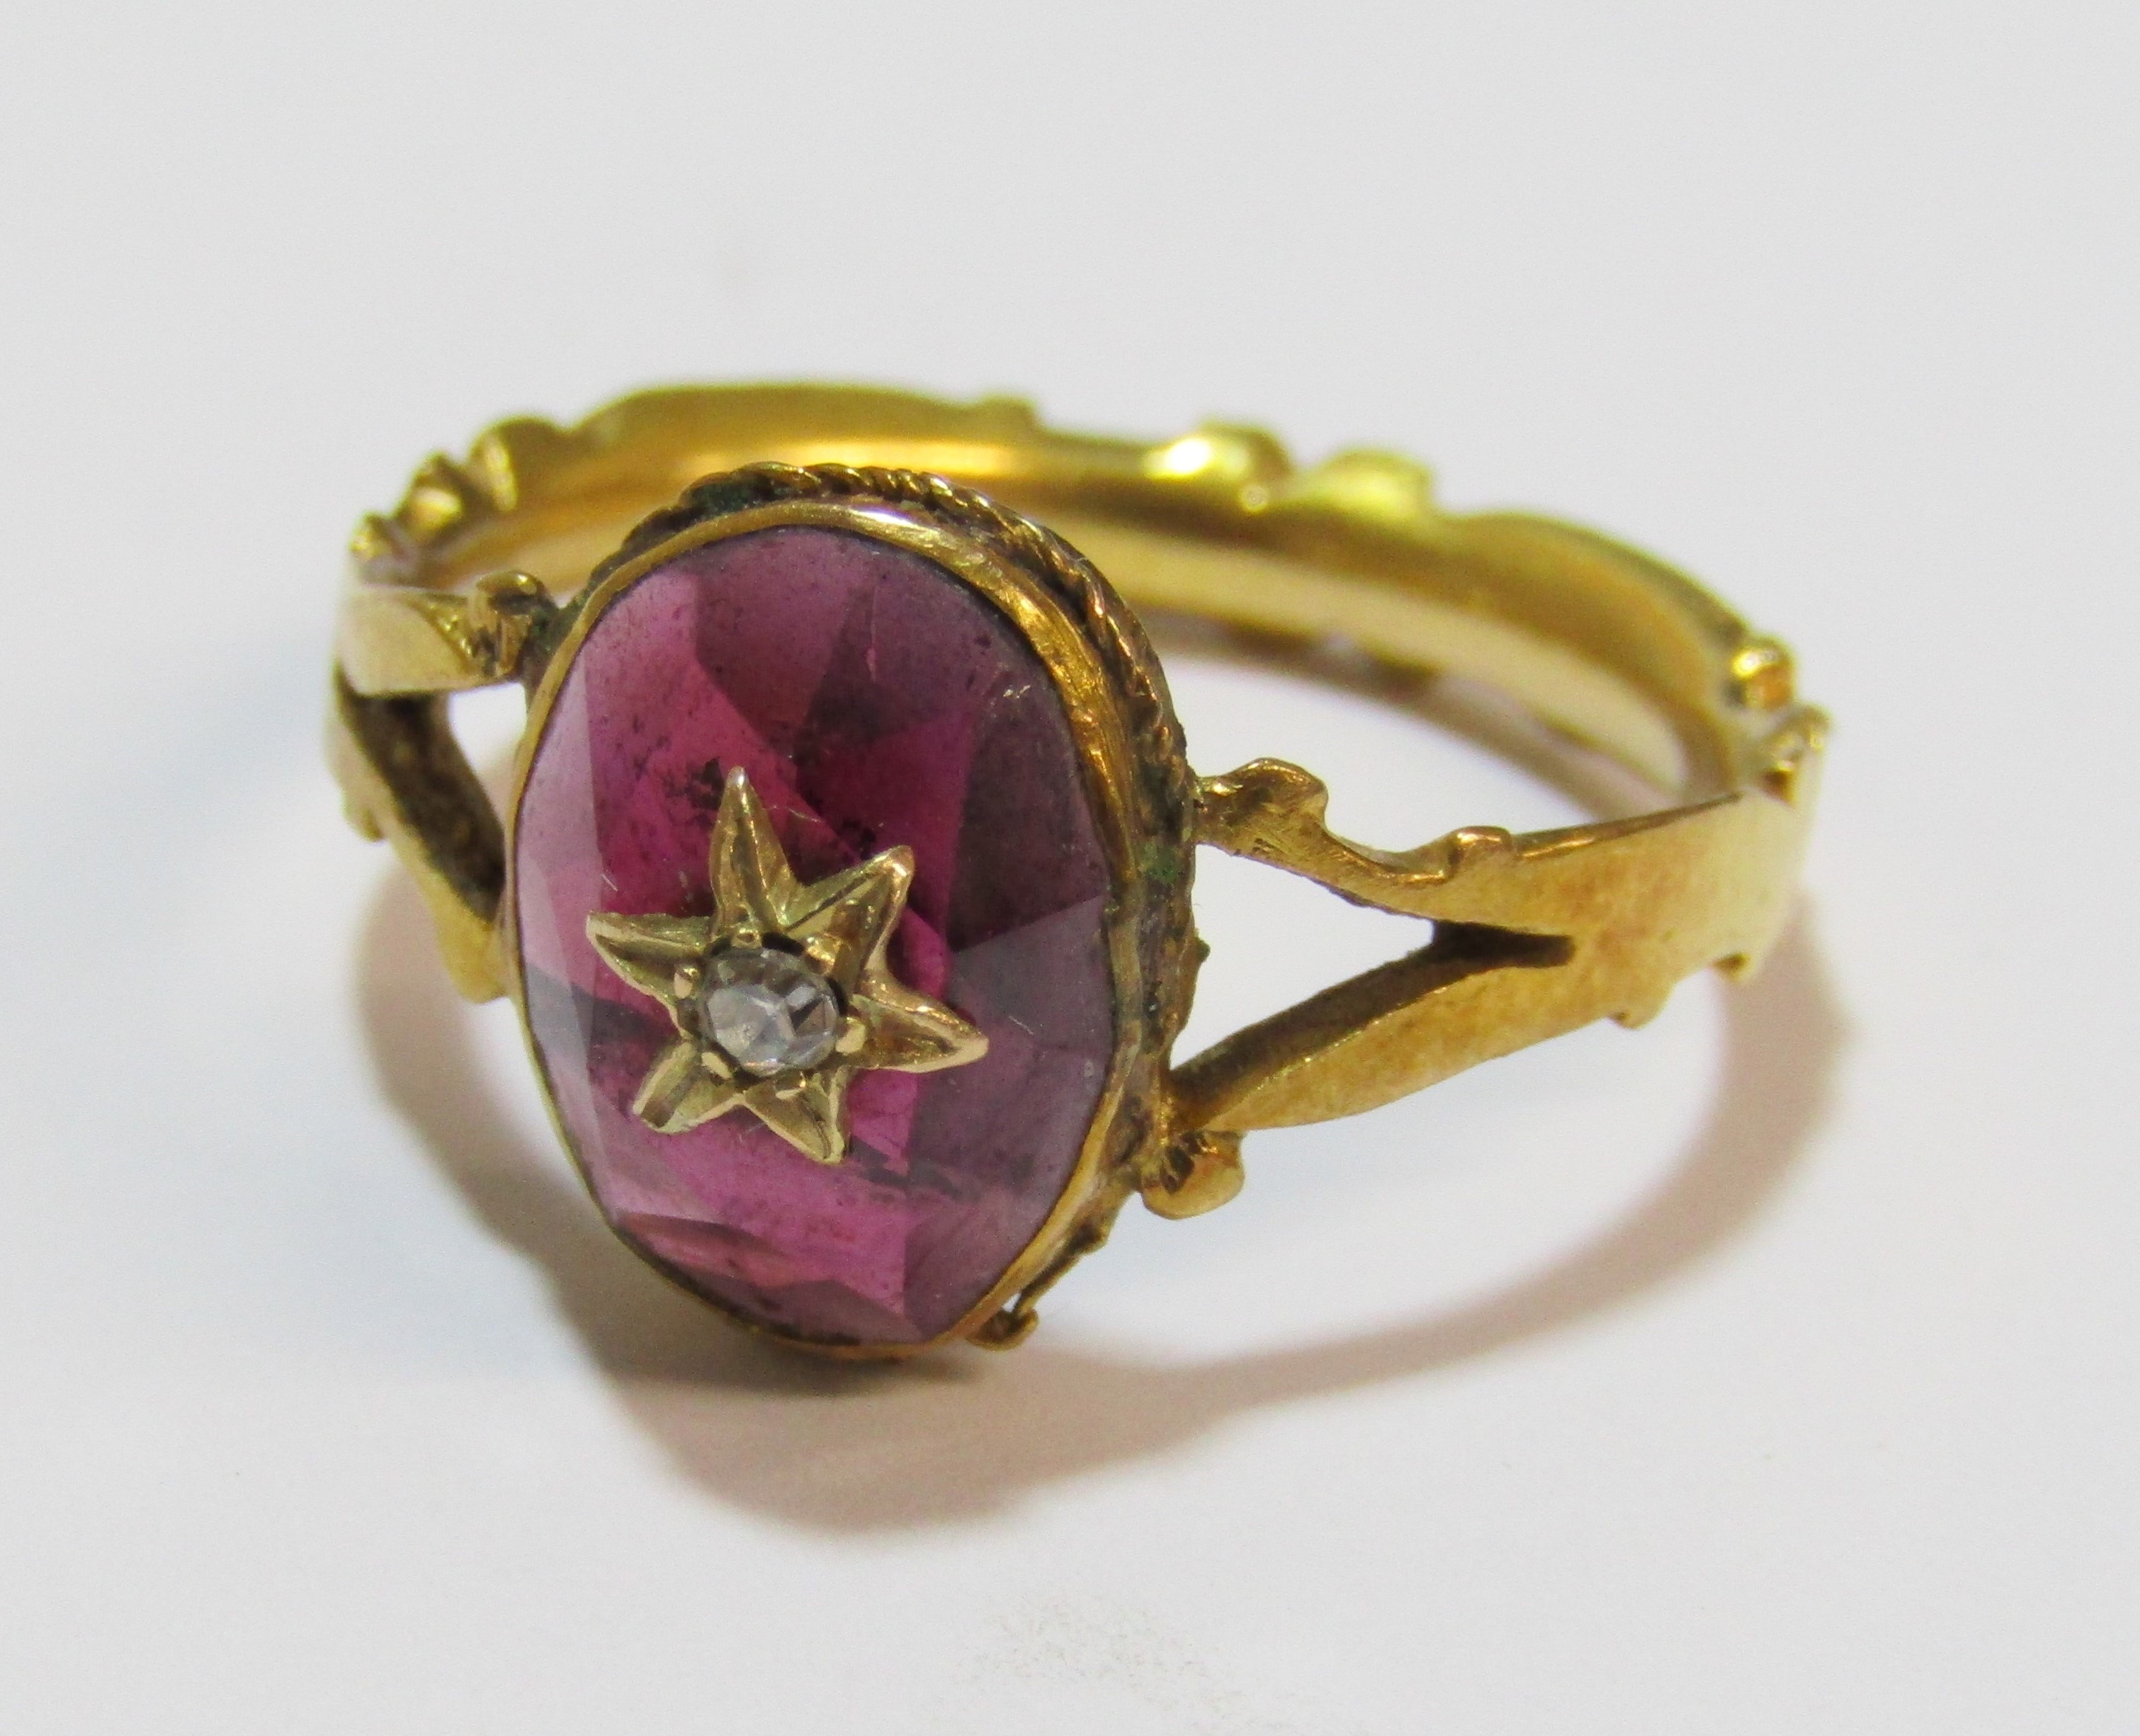 Tested as 18ct gold ring with oval garnet cabochon stone decorated with star design and single